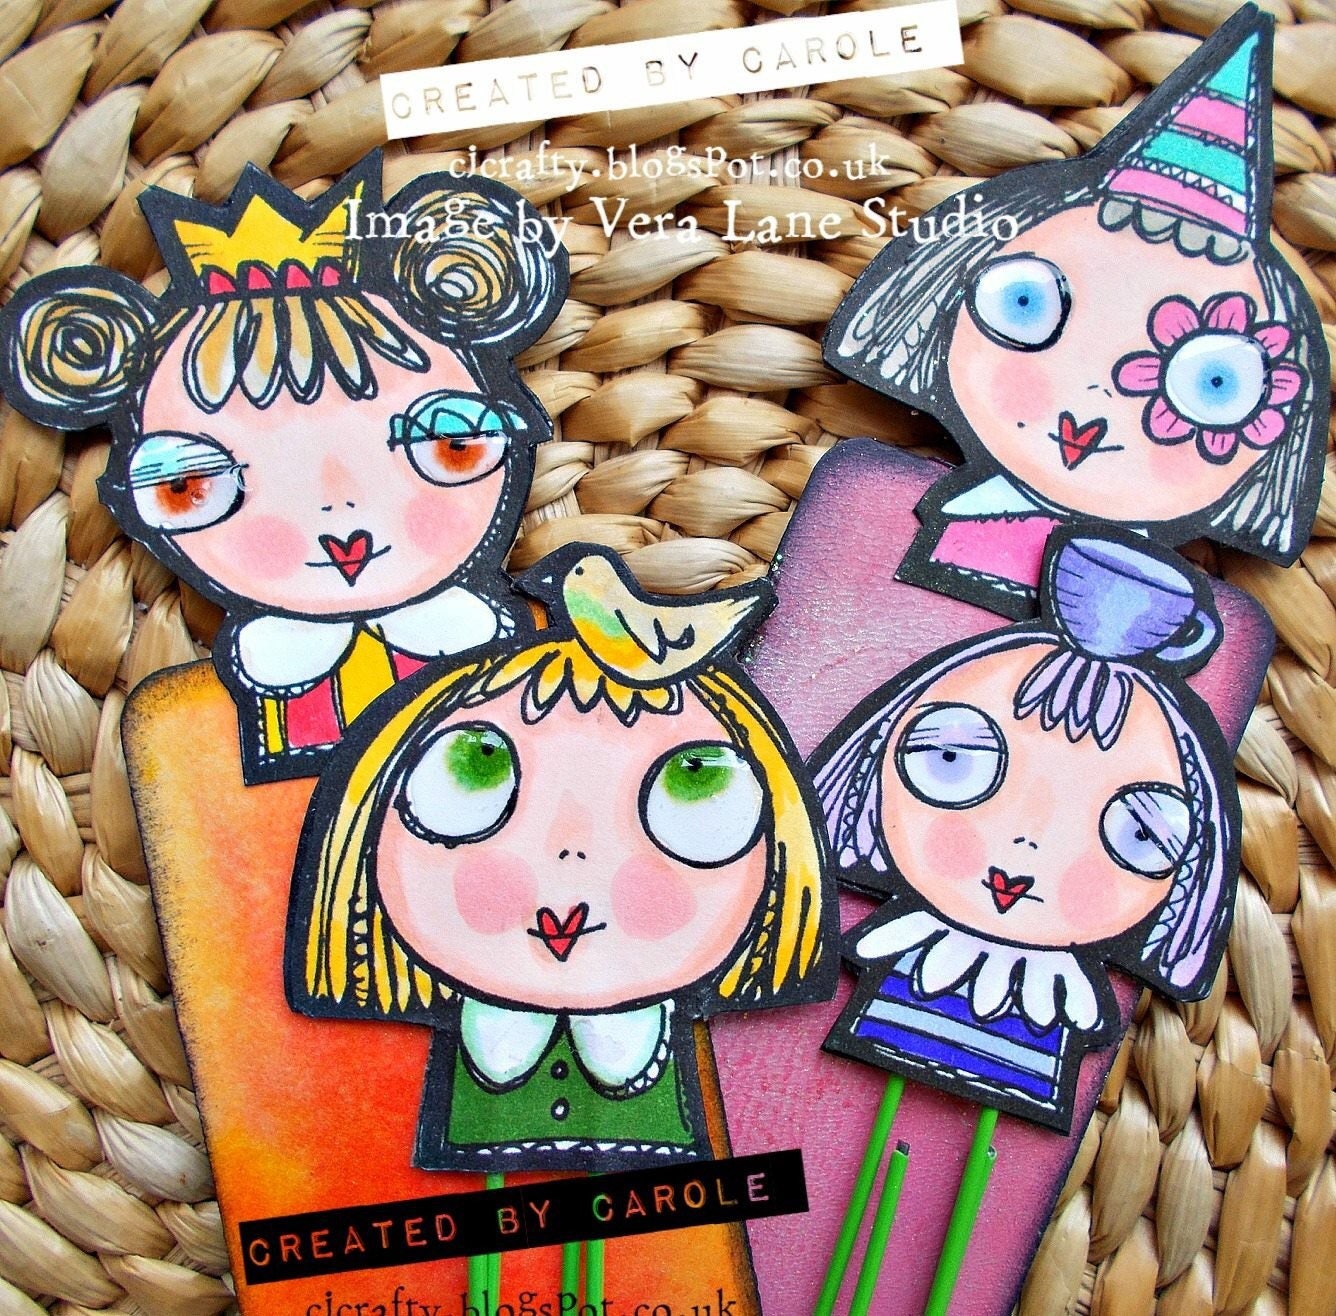 The girls on the block - 4 digi stamp bundle for planner clips and more